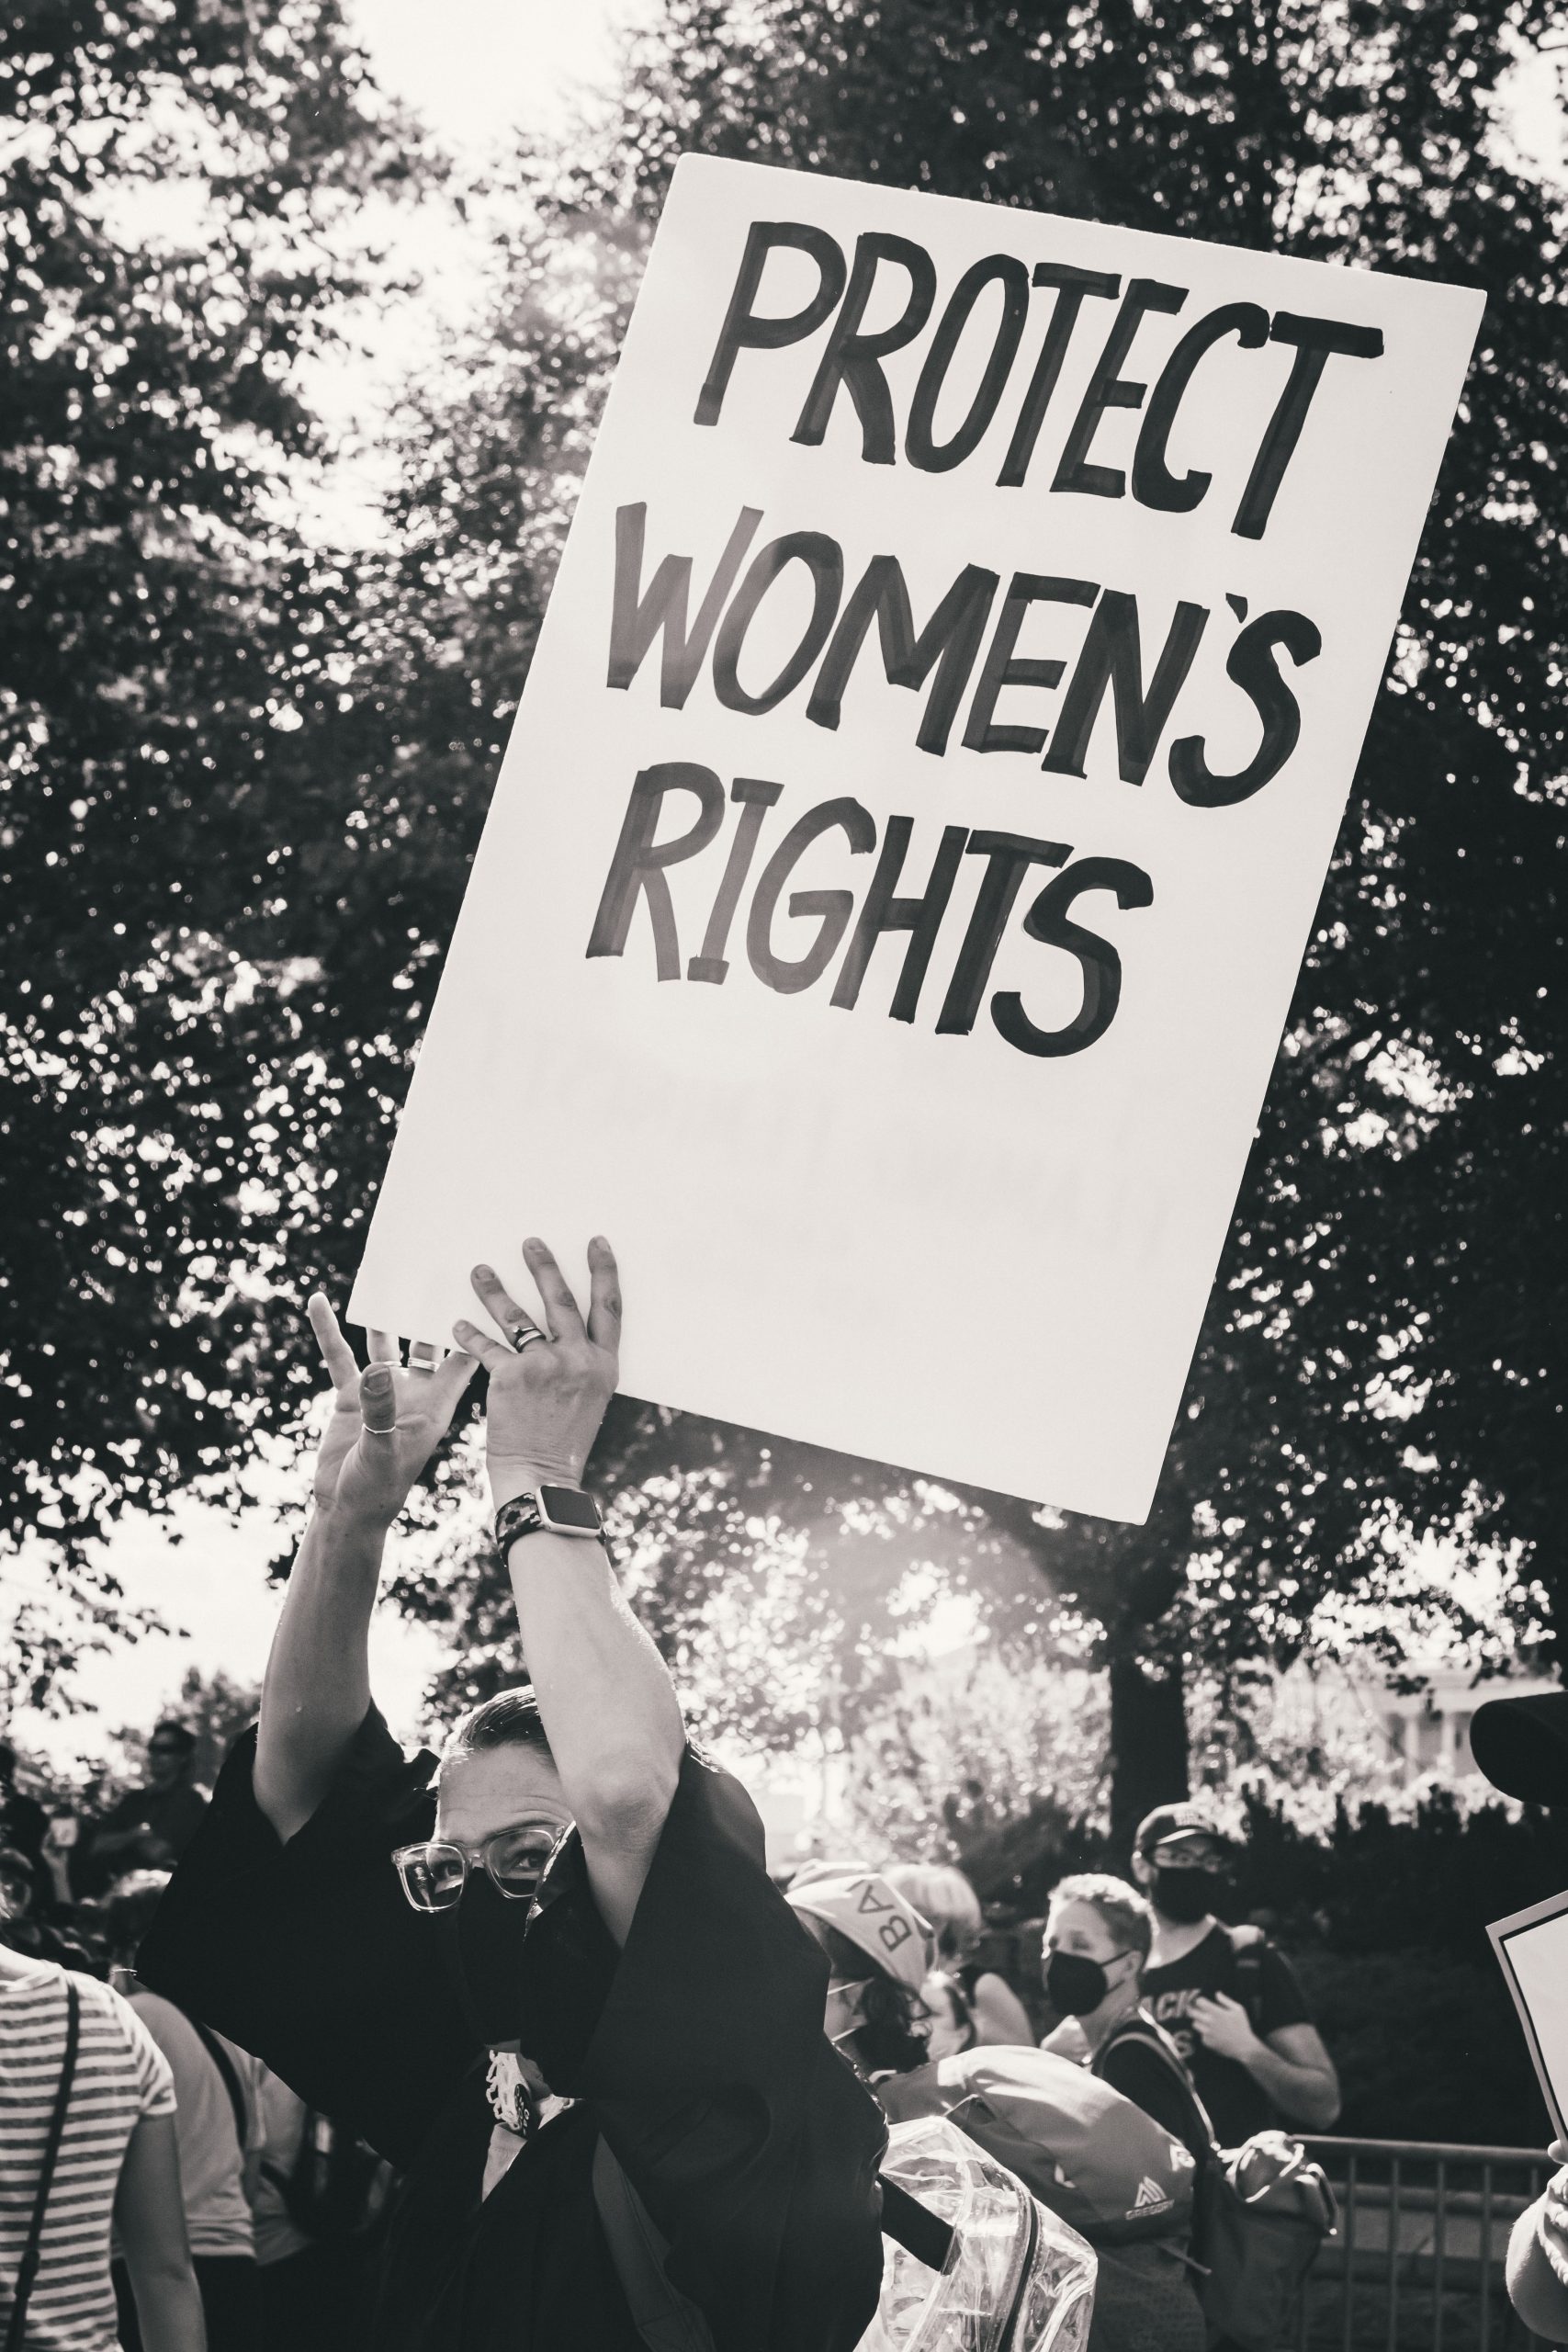 protest sign that says "protect women's rights"